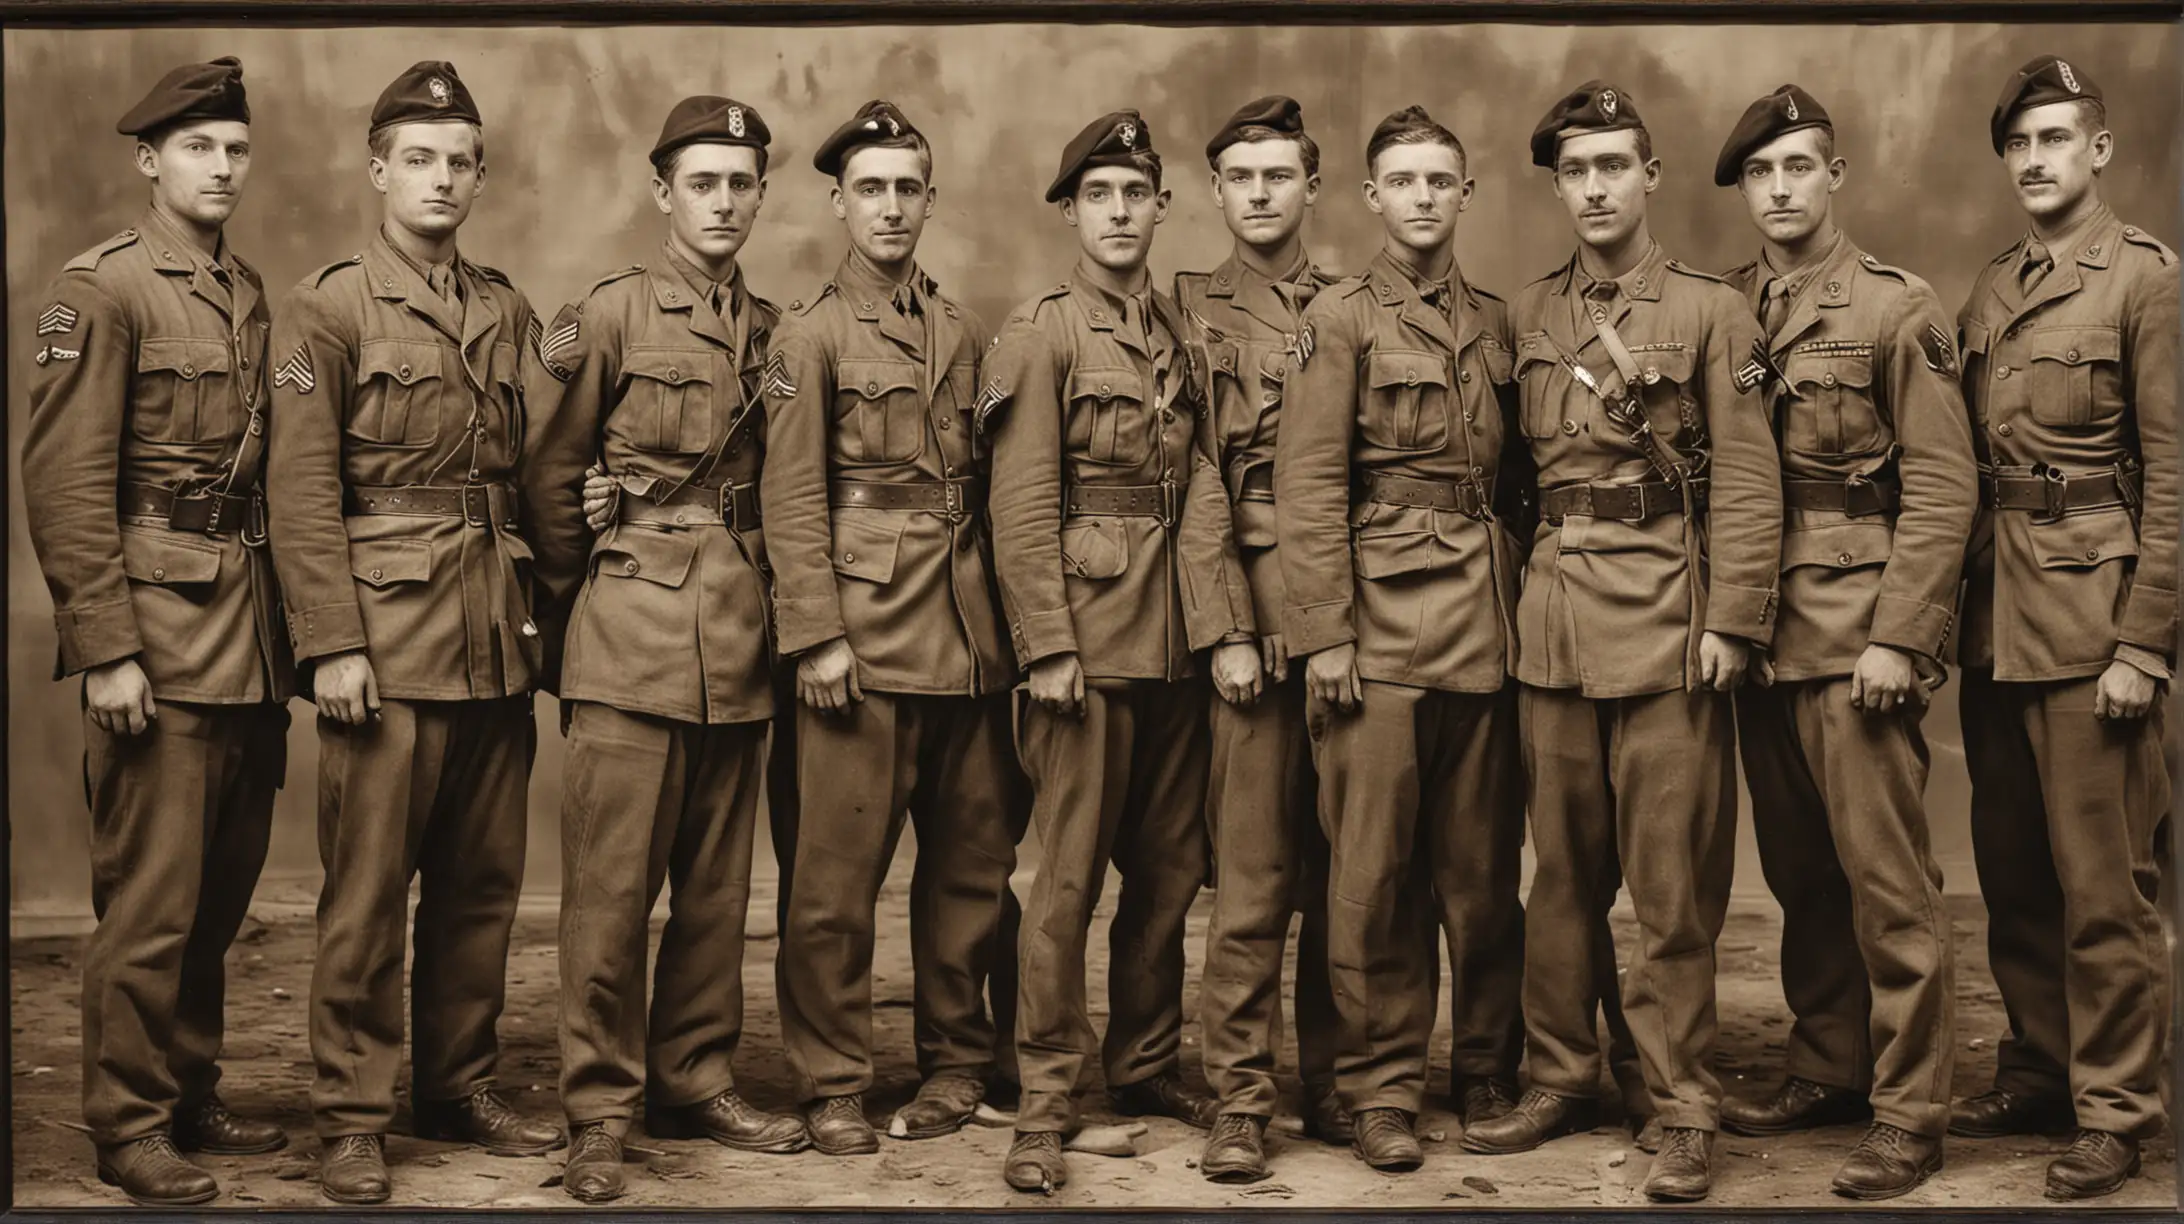 Brothers in Arms
Display a group photo of Ryan with his fellow soldiers, symbolizing the bonds of brotherhood forged in combat.
Caption: "United by duty and honor: Ryan and his brothers-in-arms, bound together by the crucible of war.